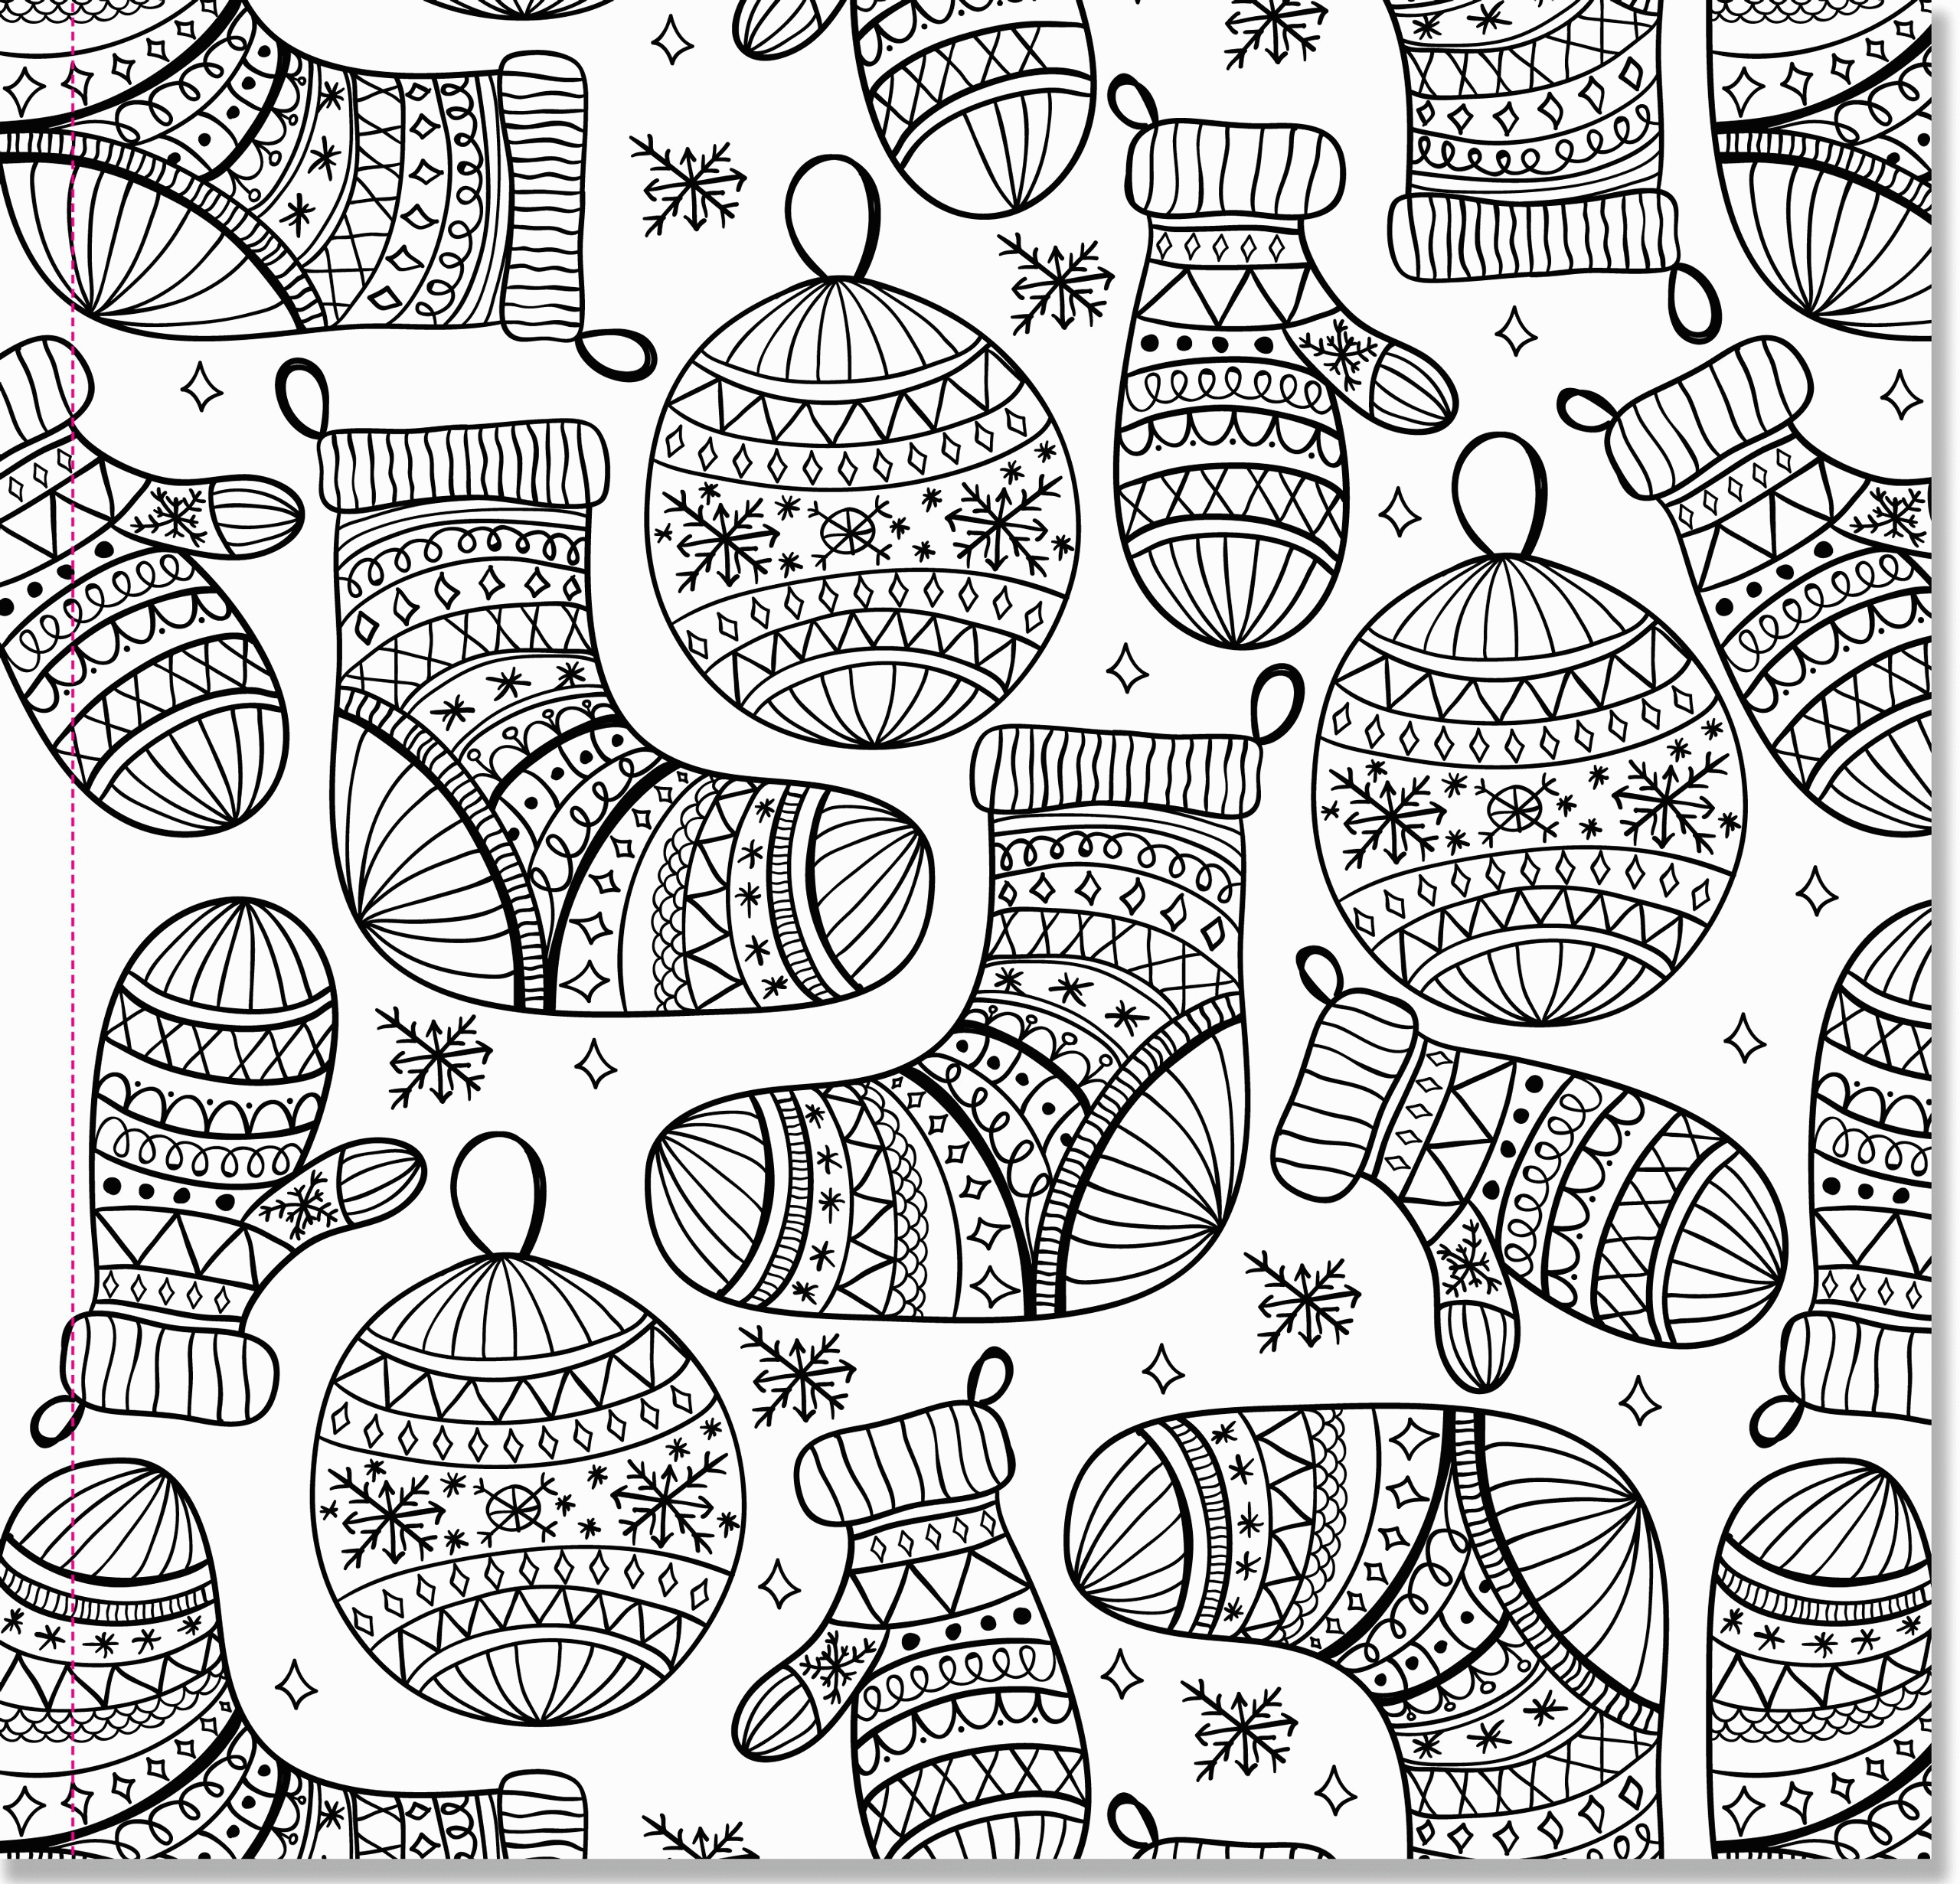 Free Intricate Christmas Coloring Pages, Download Free Intricate